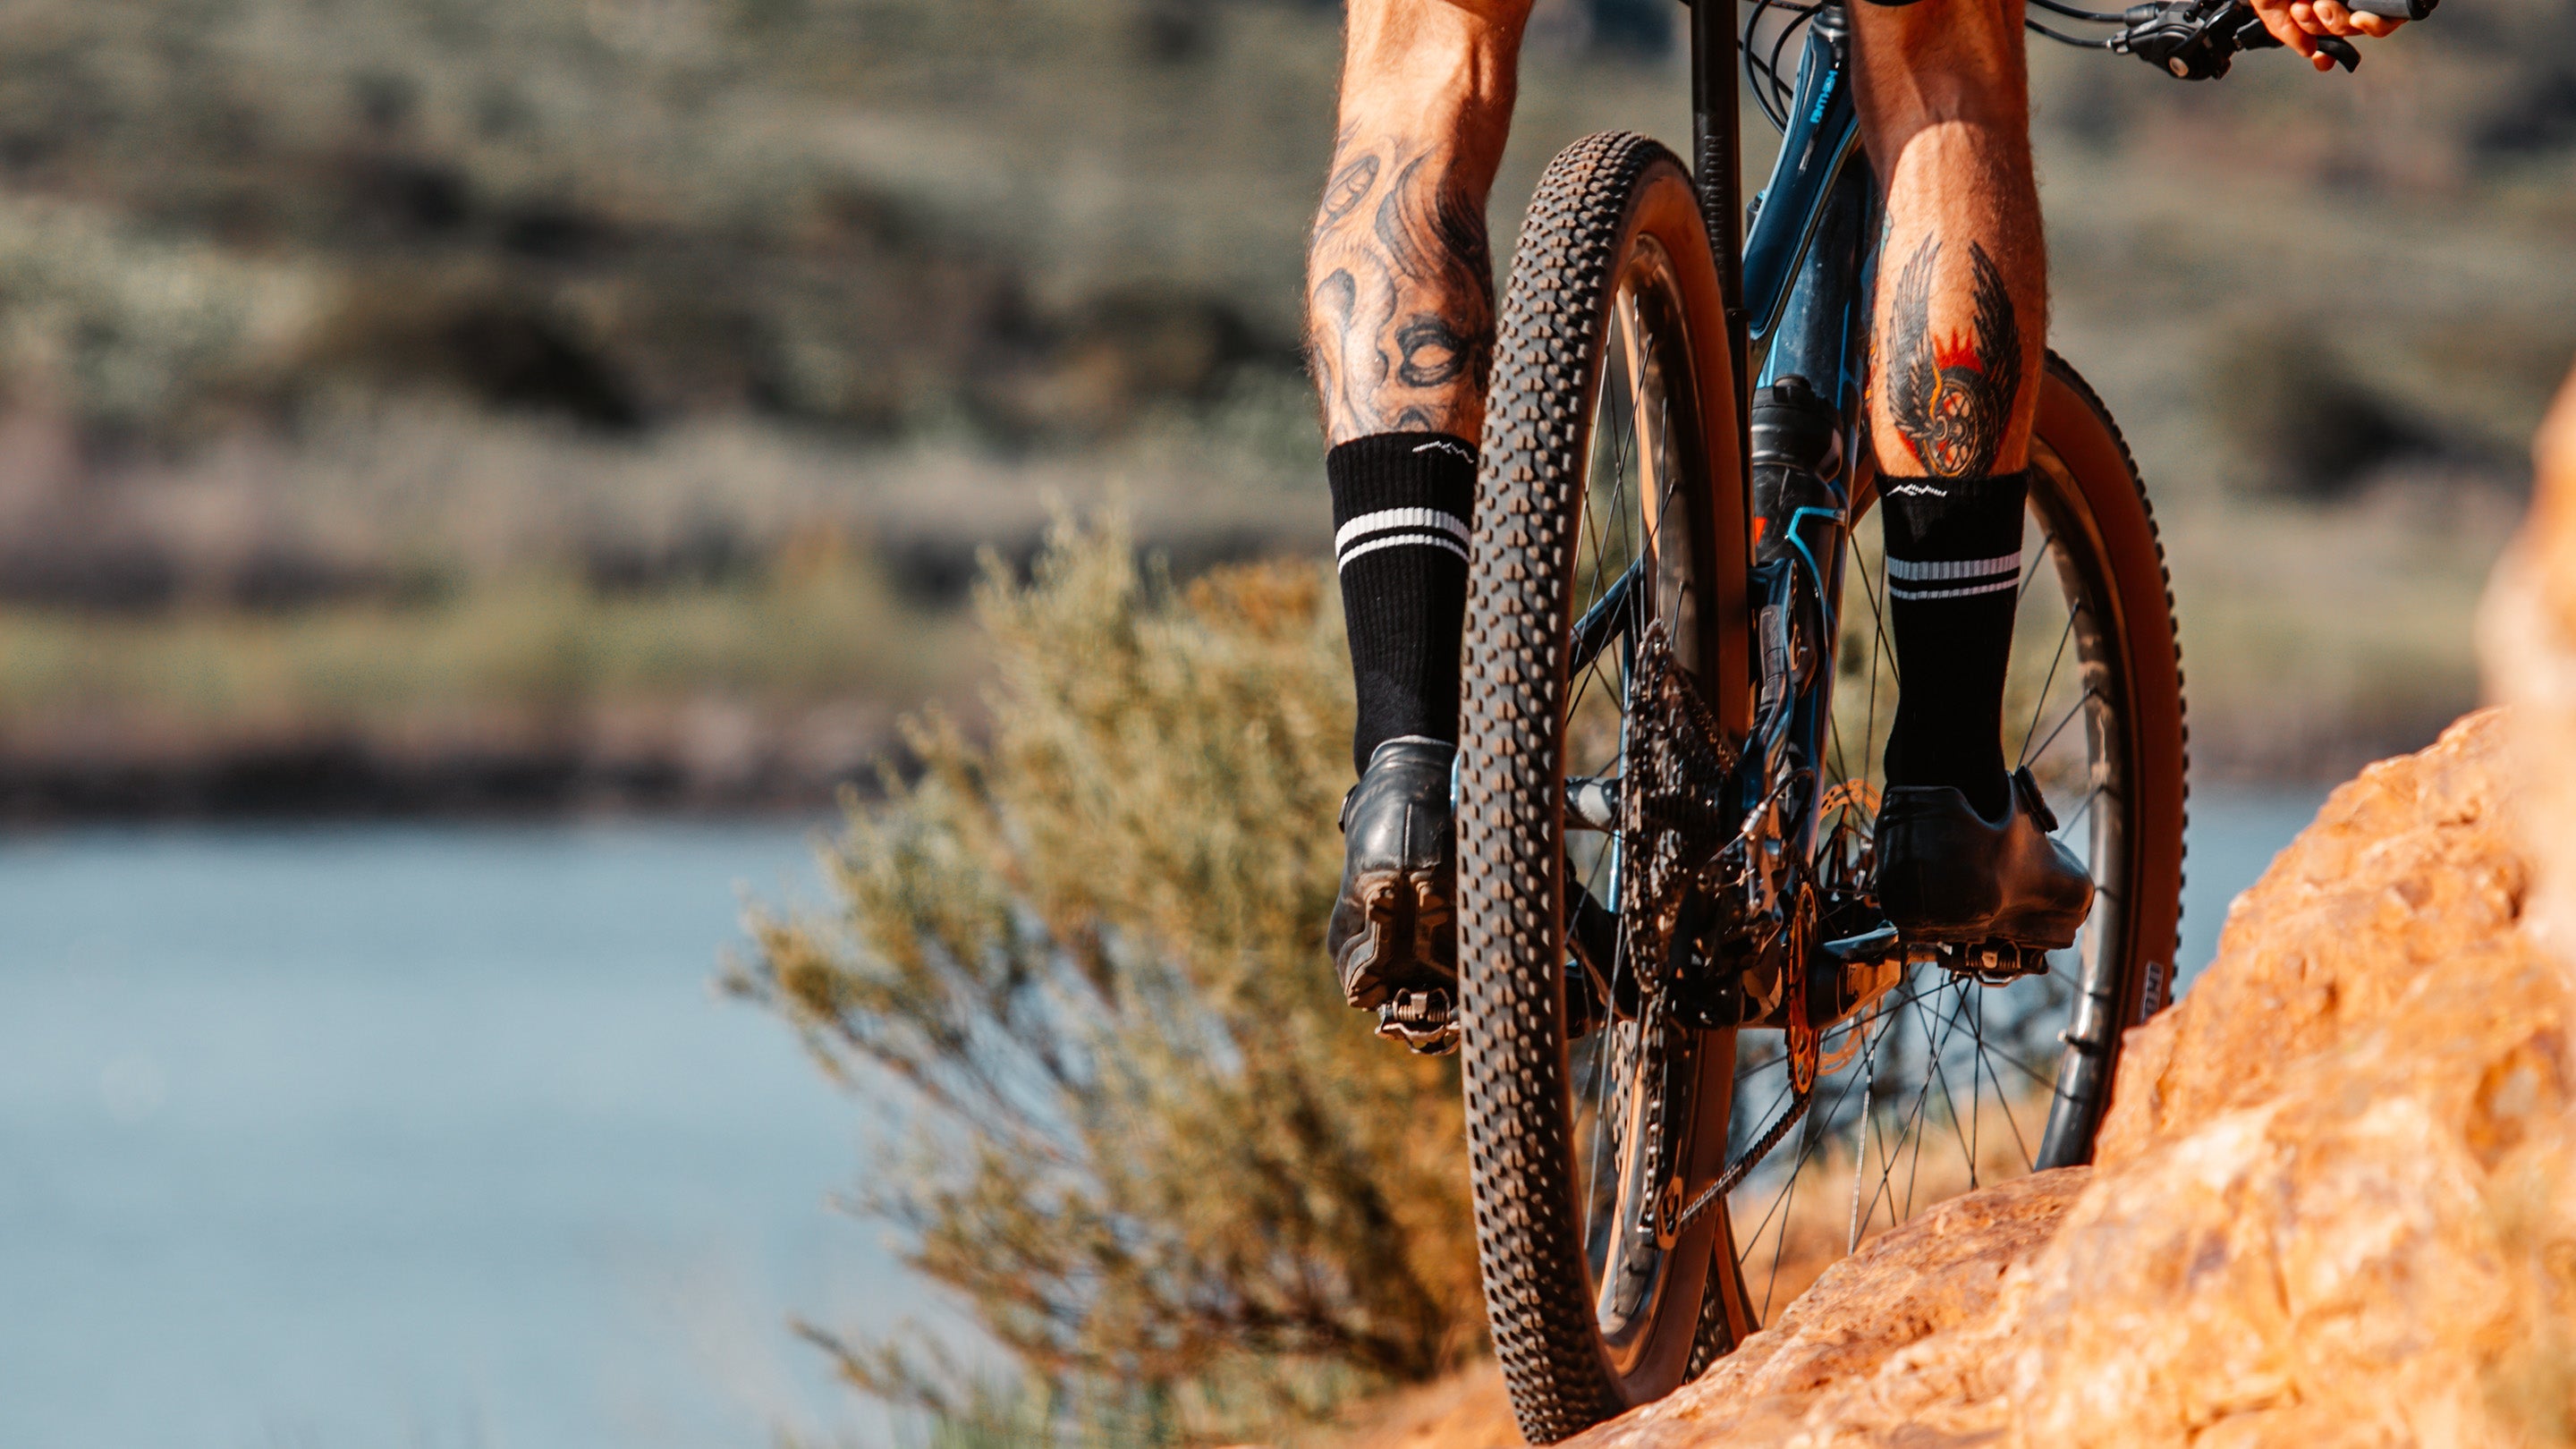 Low view of a mountain biker on a steep slope wearing darn tough athletic socks